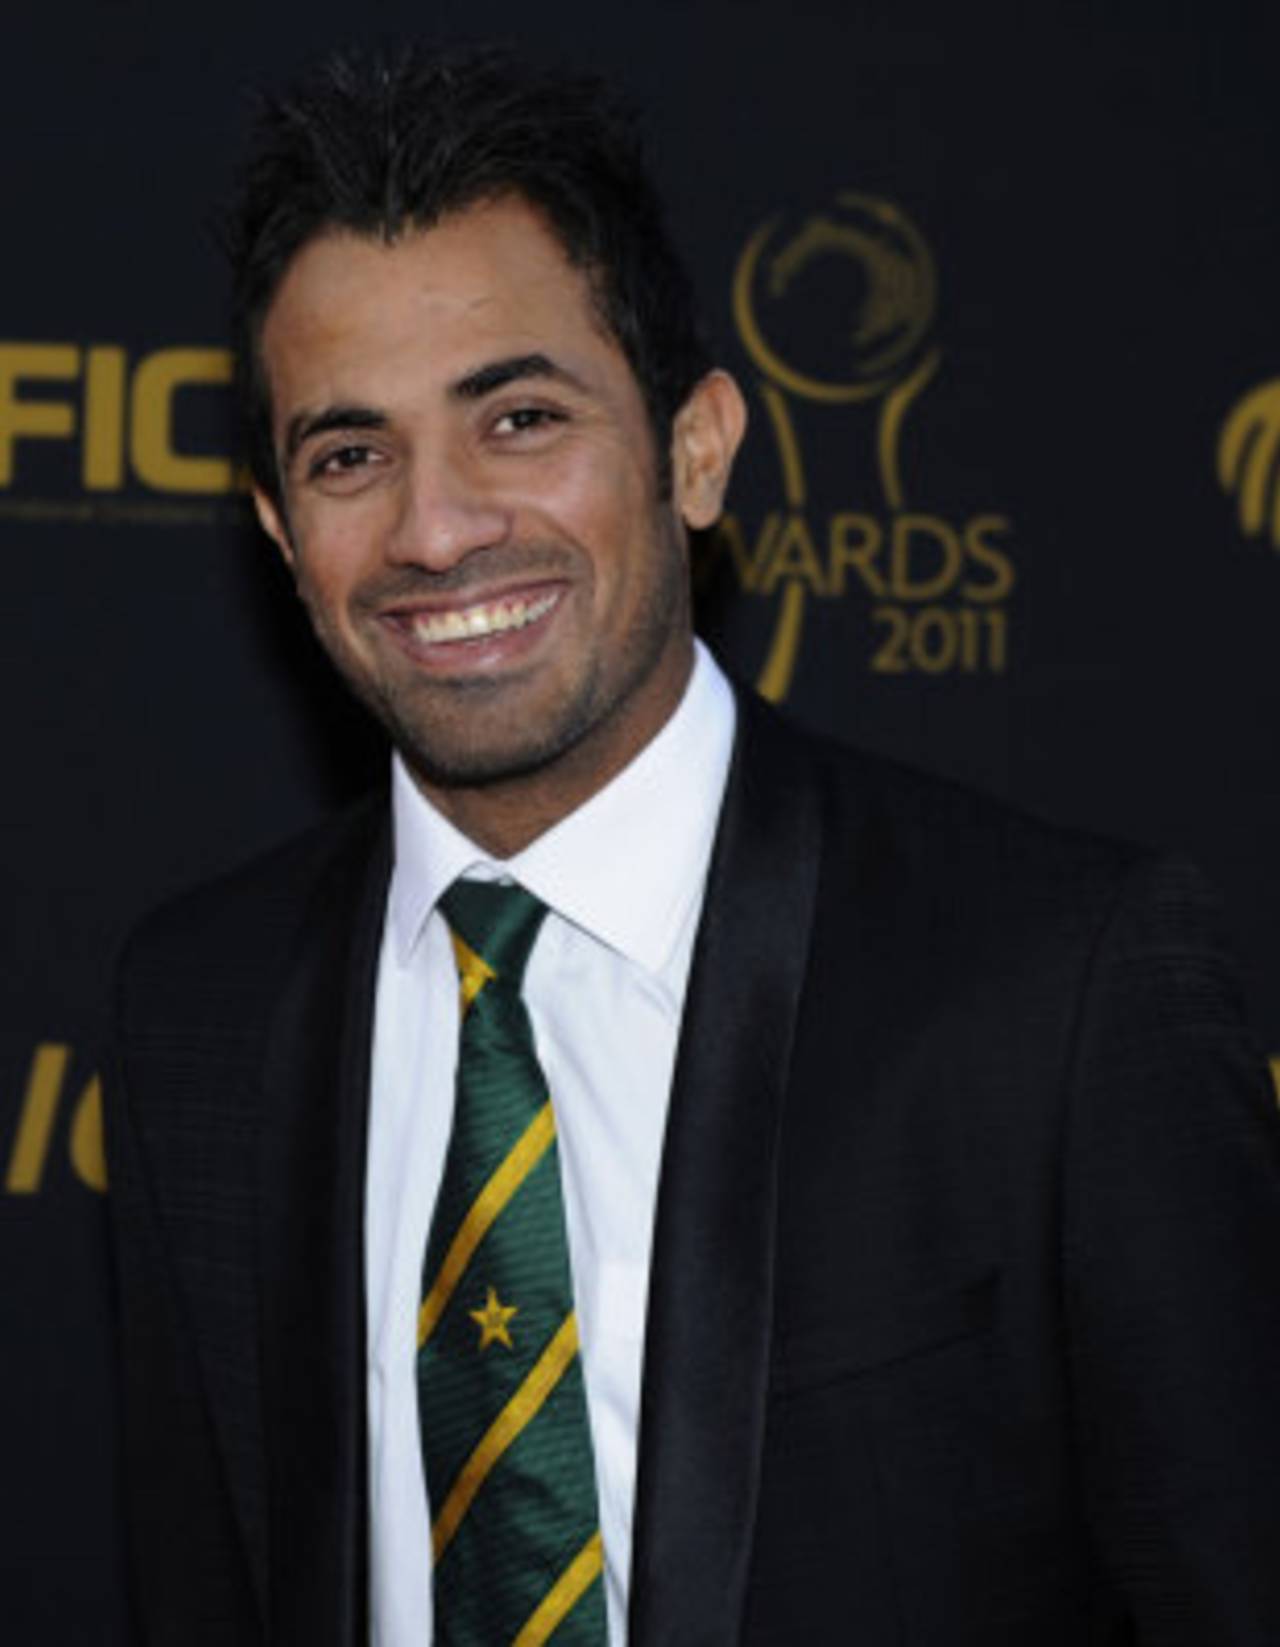 Wahab Riaz attends the ICC awards, London, September 12, 2011